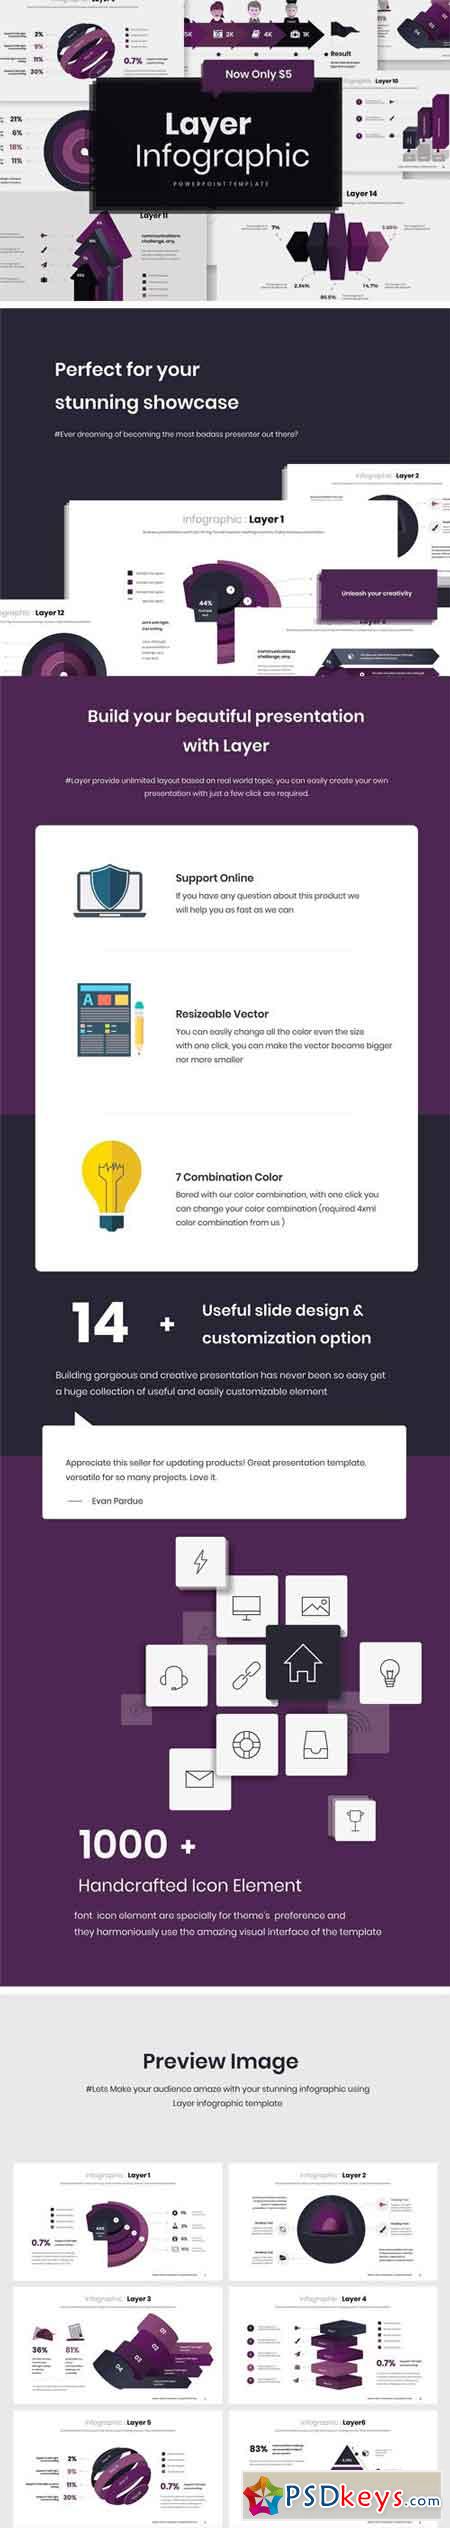 Layer Infographic PowerPoint 2271988